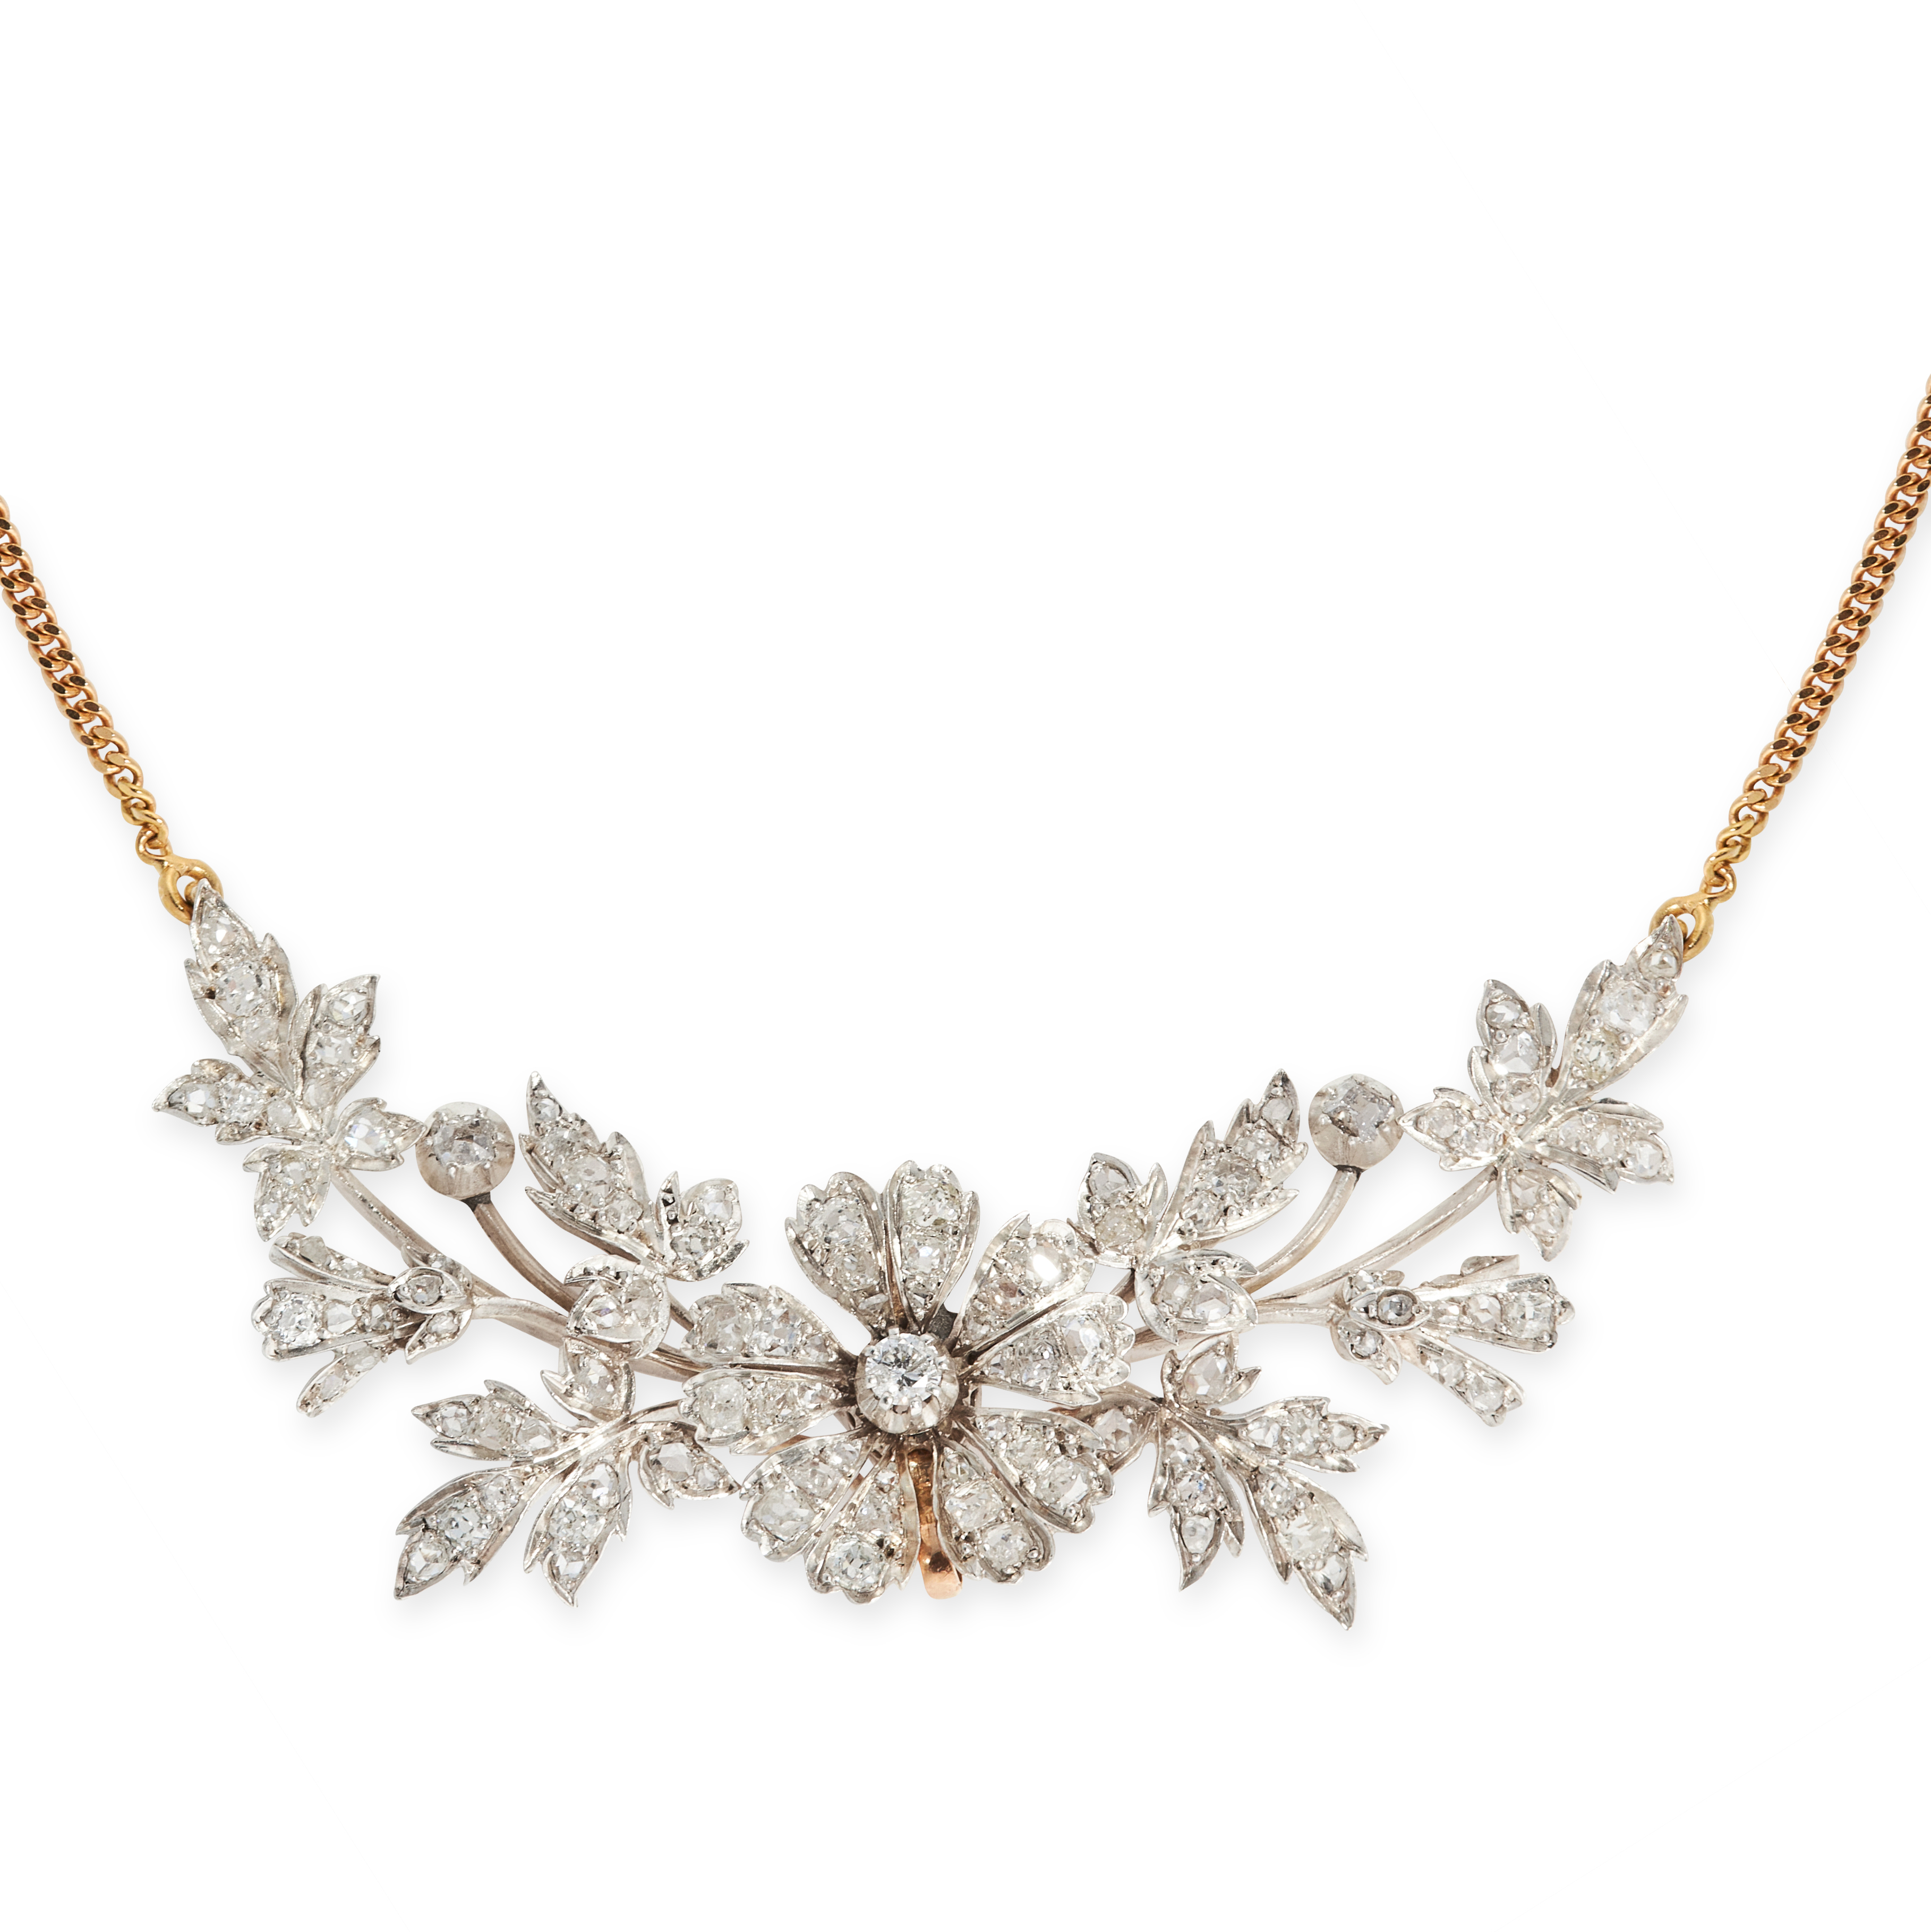 AN ANTIQUE DIAMOND NECKLACE in 18ct yellow gold and silver, designed as a flower accented by